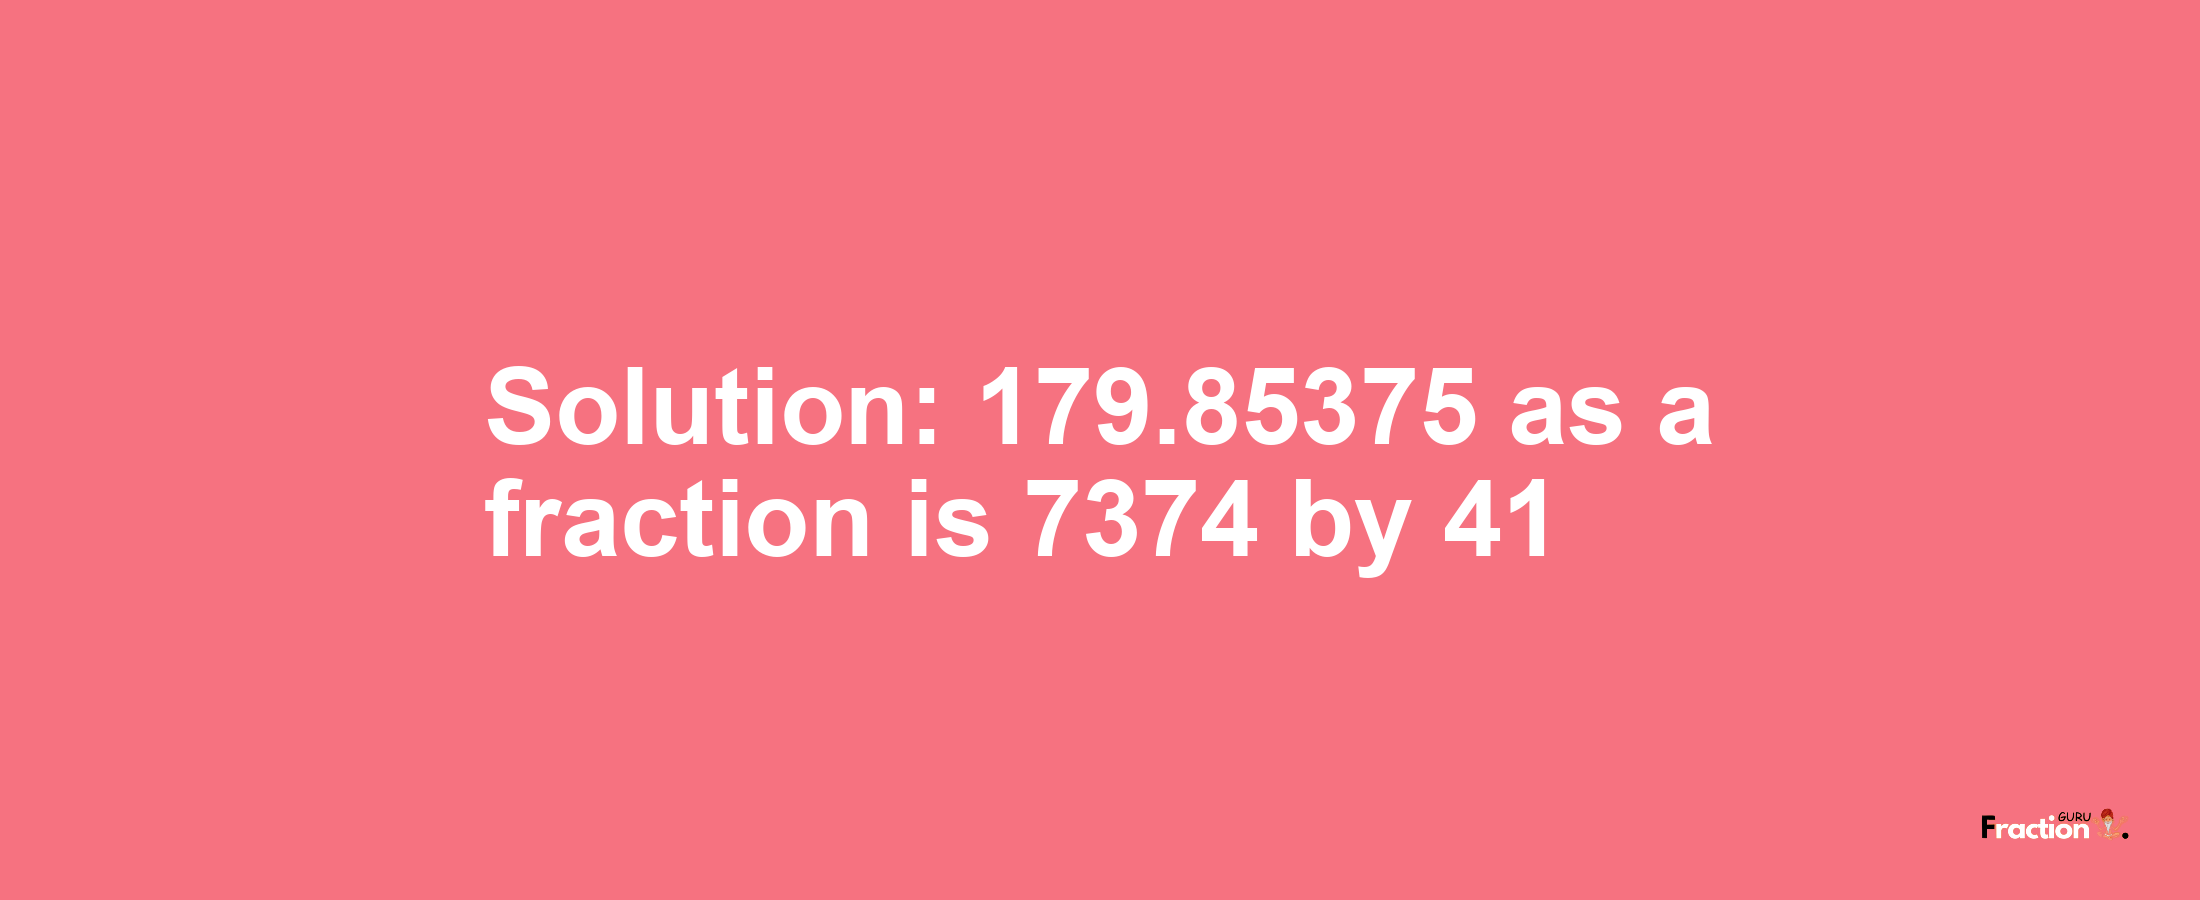 Solution:179.85375 as a fraction is 7374/41